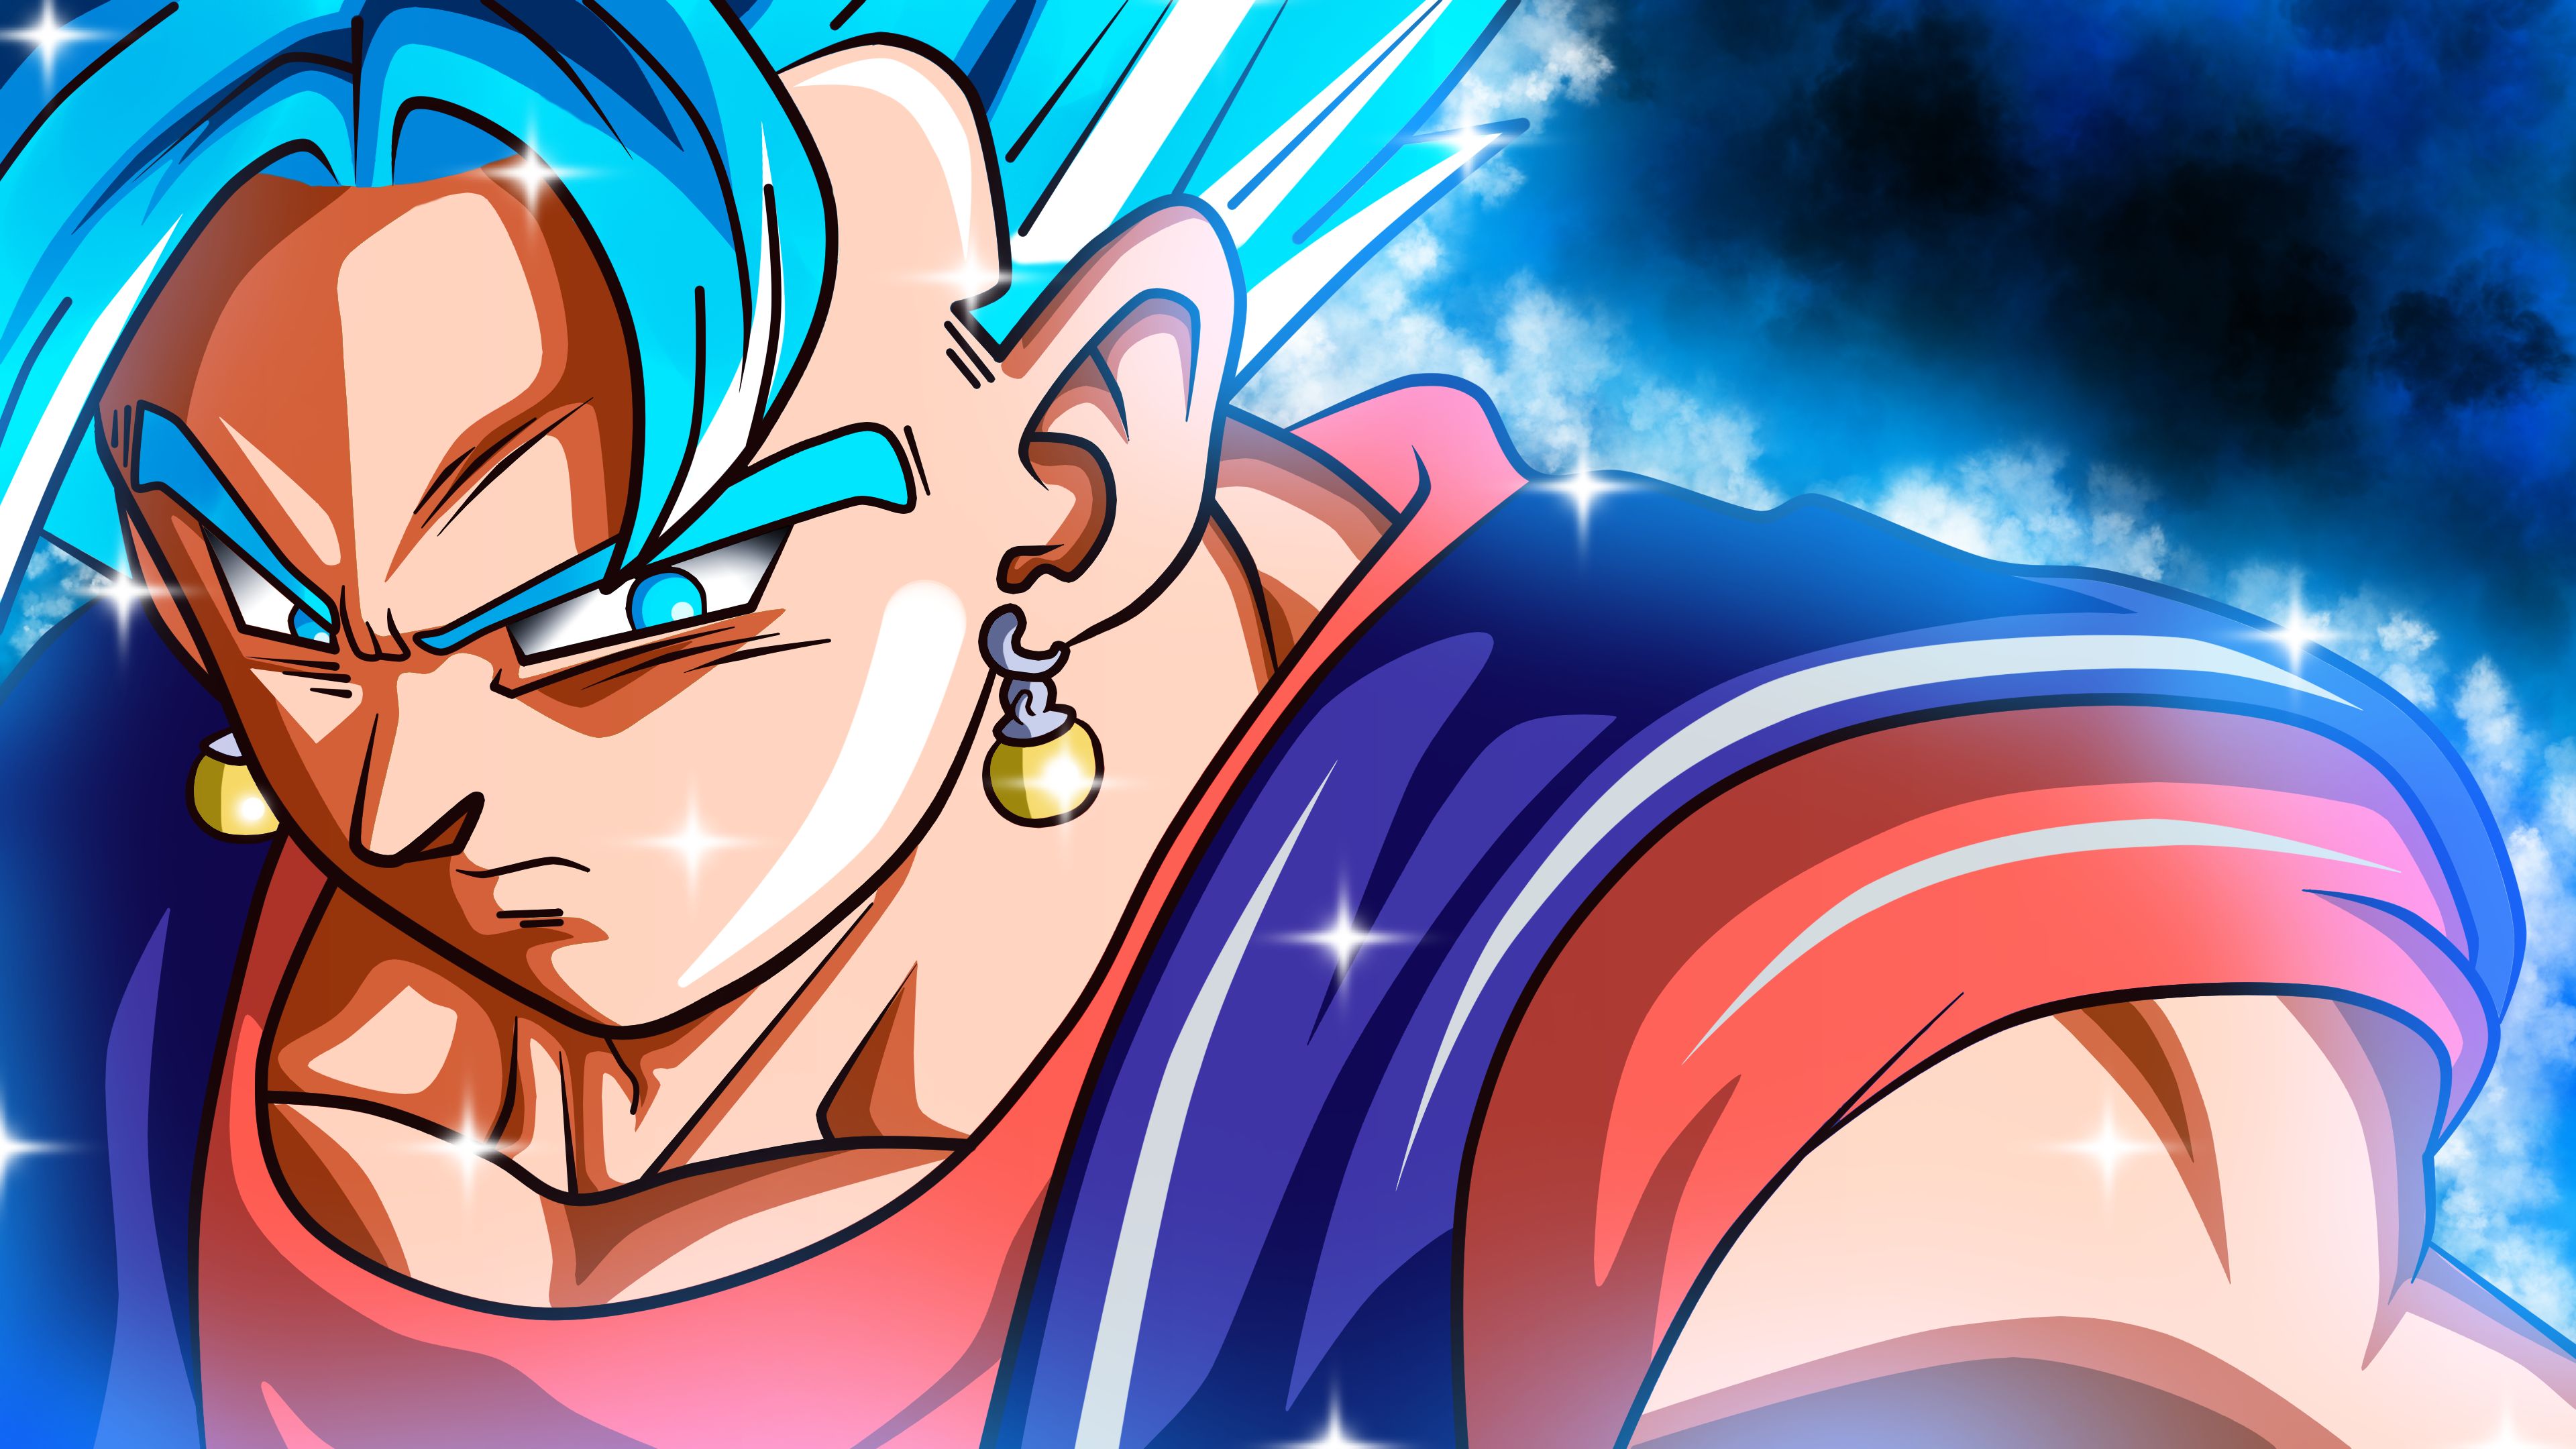 Vegito (Dragon Ball) wallpapers for desktop, download free Vegito (Dragon  Ball) pictures and backgrounds for PC | mob.org